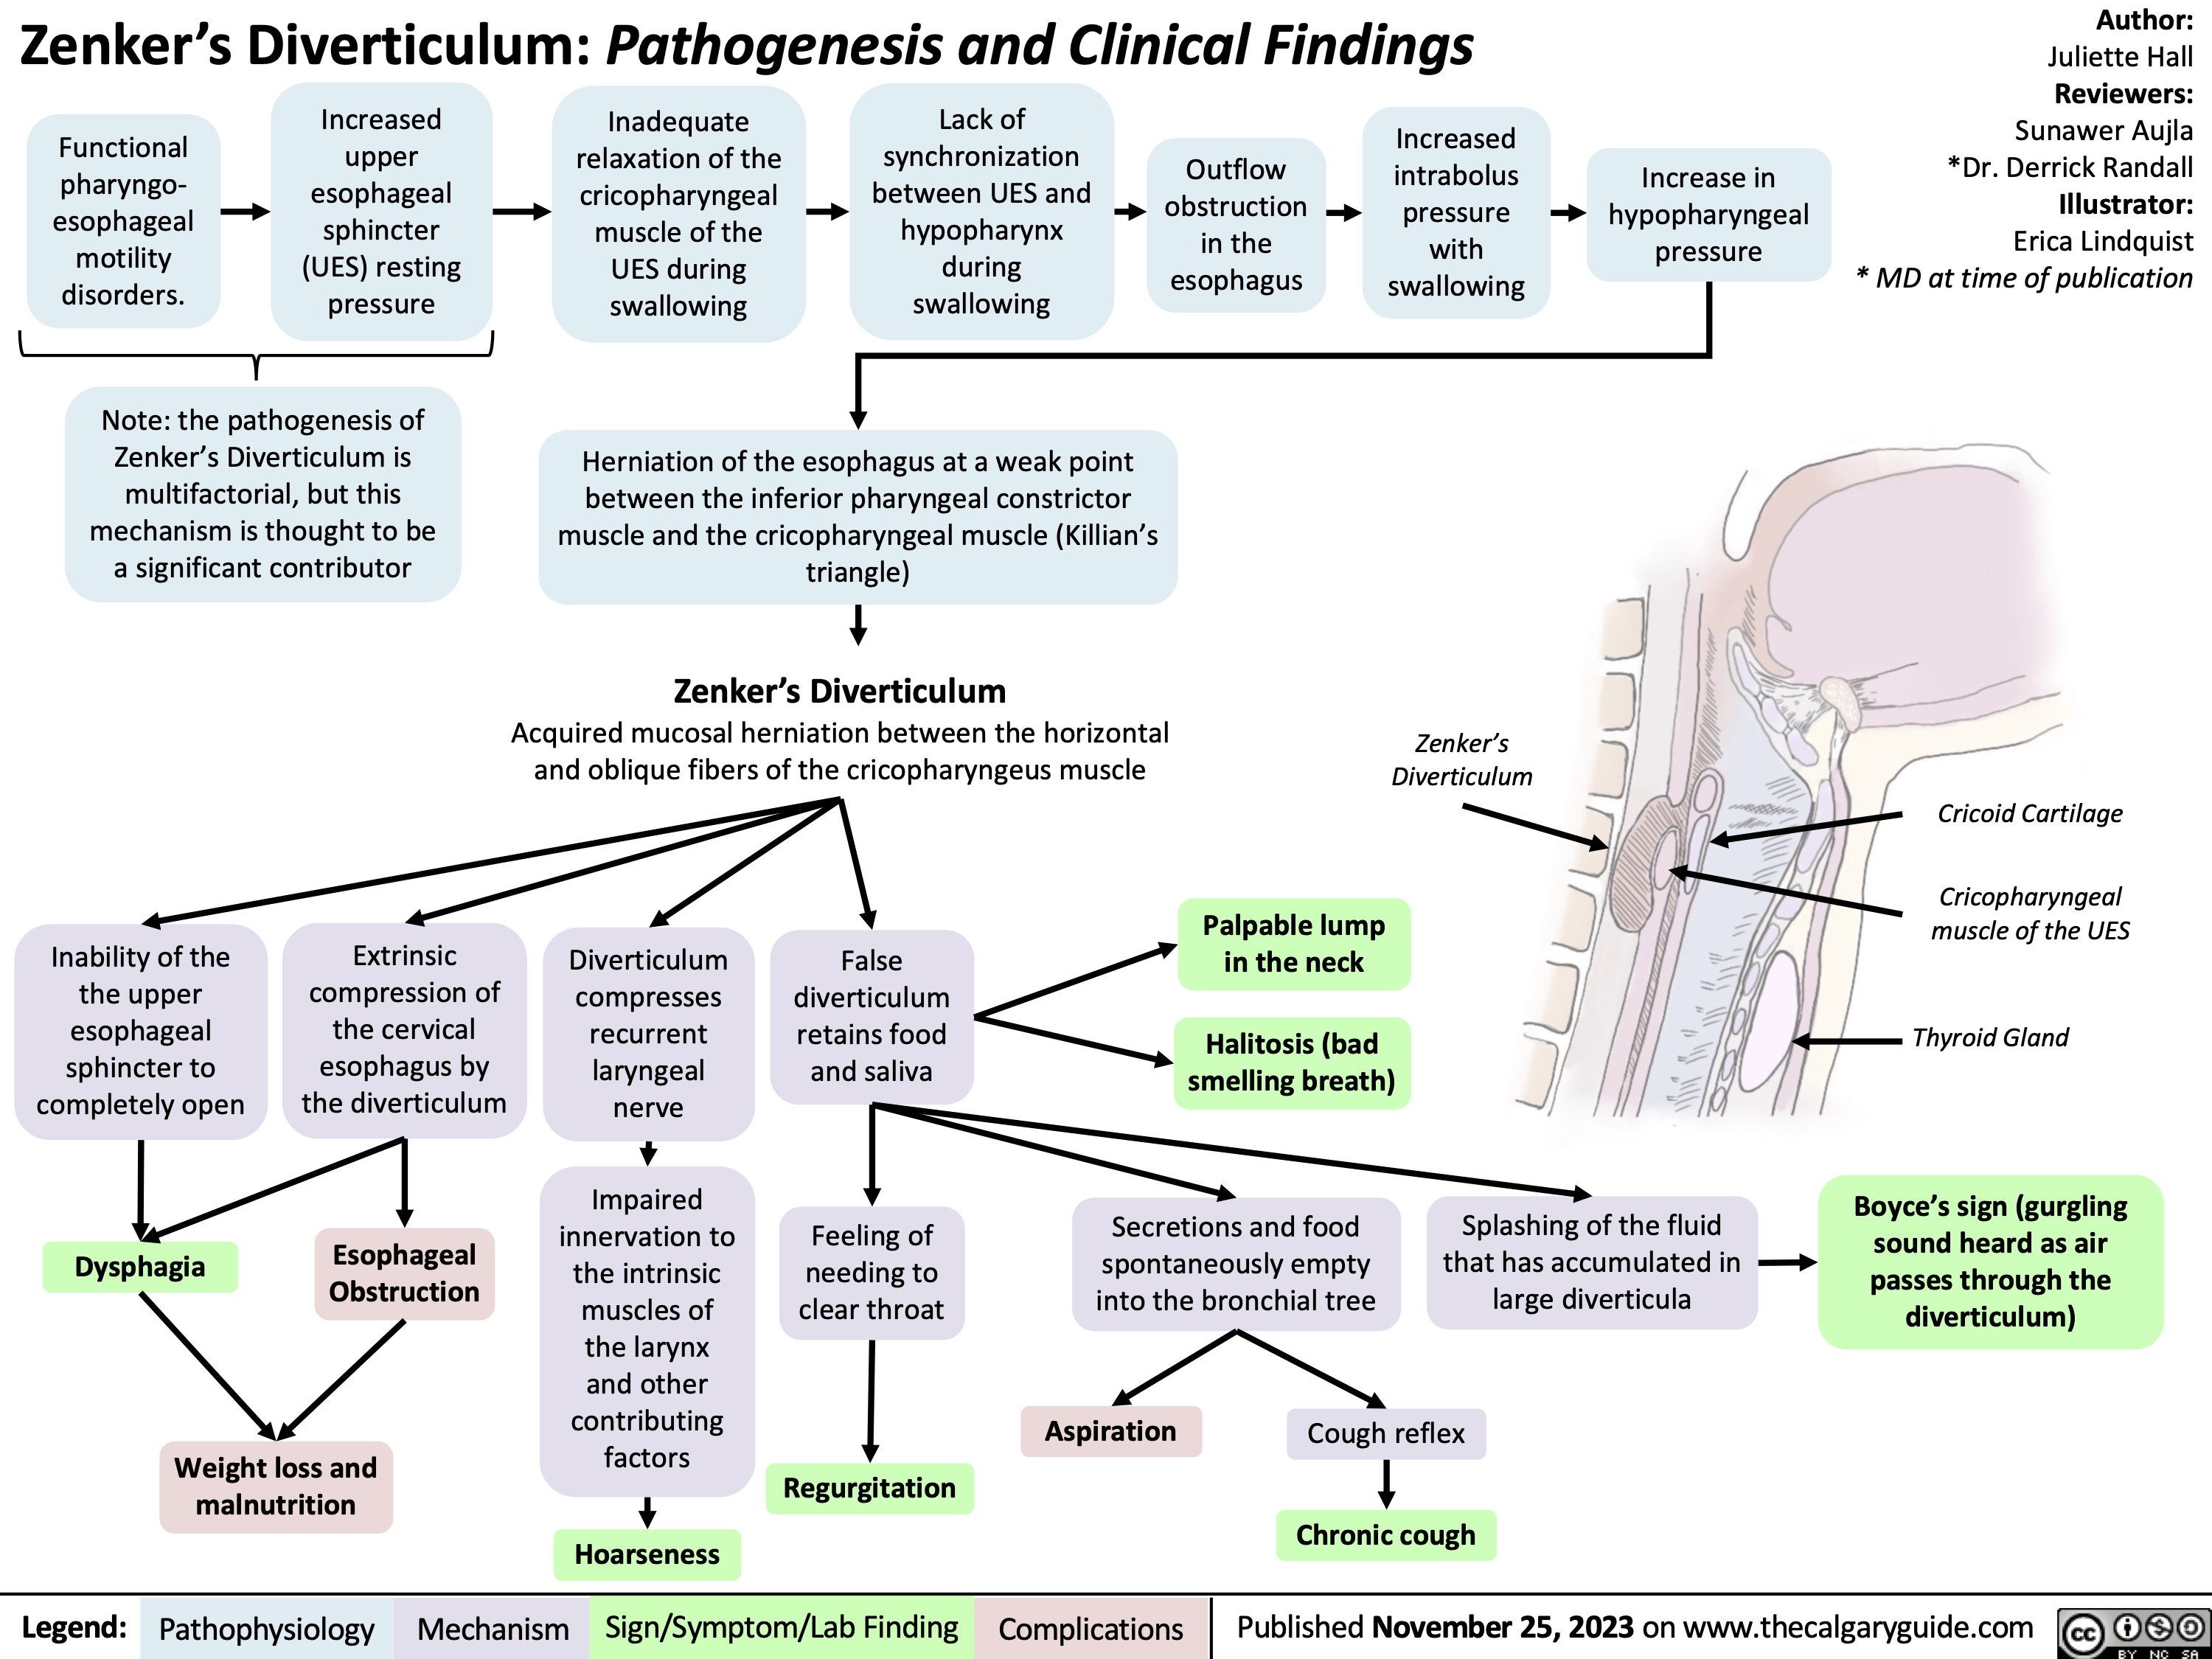 Zenker’s Diverticulum: Pathogenesis and Clinical Findings
Author:
Juliette Hall
Reviewers:
Sunawer Aujla *Dr. Derrick Randall Illustrator: Erica Lindquist * MD at time of publication
     Functional pharyngo- esophageal motility disorders.
Increased upper esophageal sphincter (UES) resting pressure
Inadequate relaxation of the cricopharyngeal muscle of the UES during swallowing
Lack of synchronization between UES and hypopharynx during swallowing
Outflow obstruction in the esophagus
Increased intrabolus pressure with swallowing
Increase in hypopharyngeal pressure
     Note: the pathogenesis of Zenker’s Diverticulum is multifactorial, but this mechanism is thought to be a significant contributor
Herniation of the esophagus at a weak point
between the inferior pharyngeal constrictor muscle and the cricopharyngeal muscle (Killian’s triangle)
Zenker’s Diverticulum
Acquired mucosal herniation between the horizontal and oblique fibers of the cricopharyngeus muscle
             Inability of the the upper esophageal sphincter to completely open
Dysphagia
Extrinsic compression of the cervical esophagus by the diverticulum
Esophageal Obstruction
Diverticulum compresses recurrent laryngeal nerve
Impaired
innervation to
the intrinsic
muscles of
the larynx
and other
contributing
factors
False diverticulum retains food and saliva
Feeling of needing to clear throat
Palpable lump in the neck
Halitosis (bad smelling breath)
Secretions and food spontaneously empty into the bronchial tree
Splashing of the fluid that has accumulated in large diverticula
Cricoid Cartilage
Cricopharyngeal muscle of the UES
Thyroid Gland
Boyce’s sign (gurgling sound heard as air passes through the diverticulum)
Zenker’s Diverticulum
                       Weight loss and malnutrition
Aspiration
Cough reflex
Chronic cough
 Regurgitation Hoarseness
   Legend:
 Pathophysiology
Mechanism
 Sign/Symptom/Lab Finding
 Complications
Published November 25, 2023 on www.thecalgaryguide.com
   